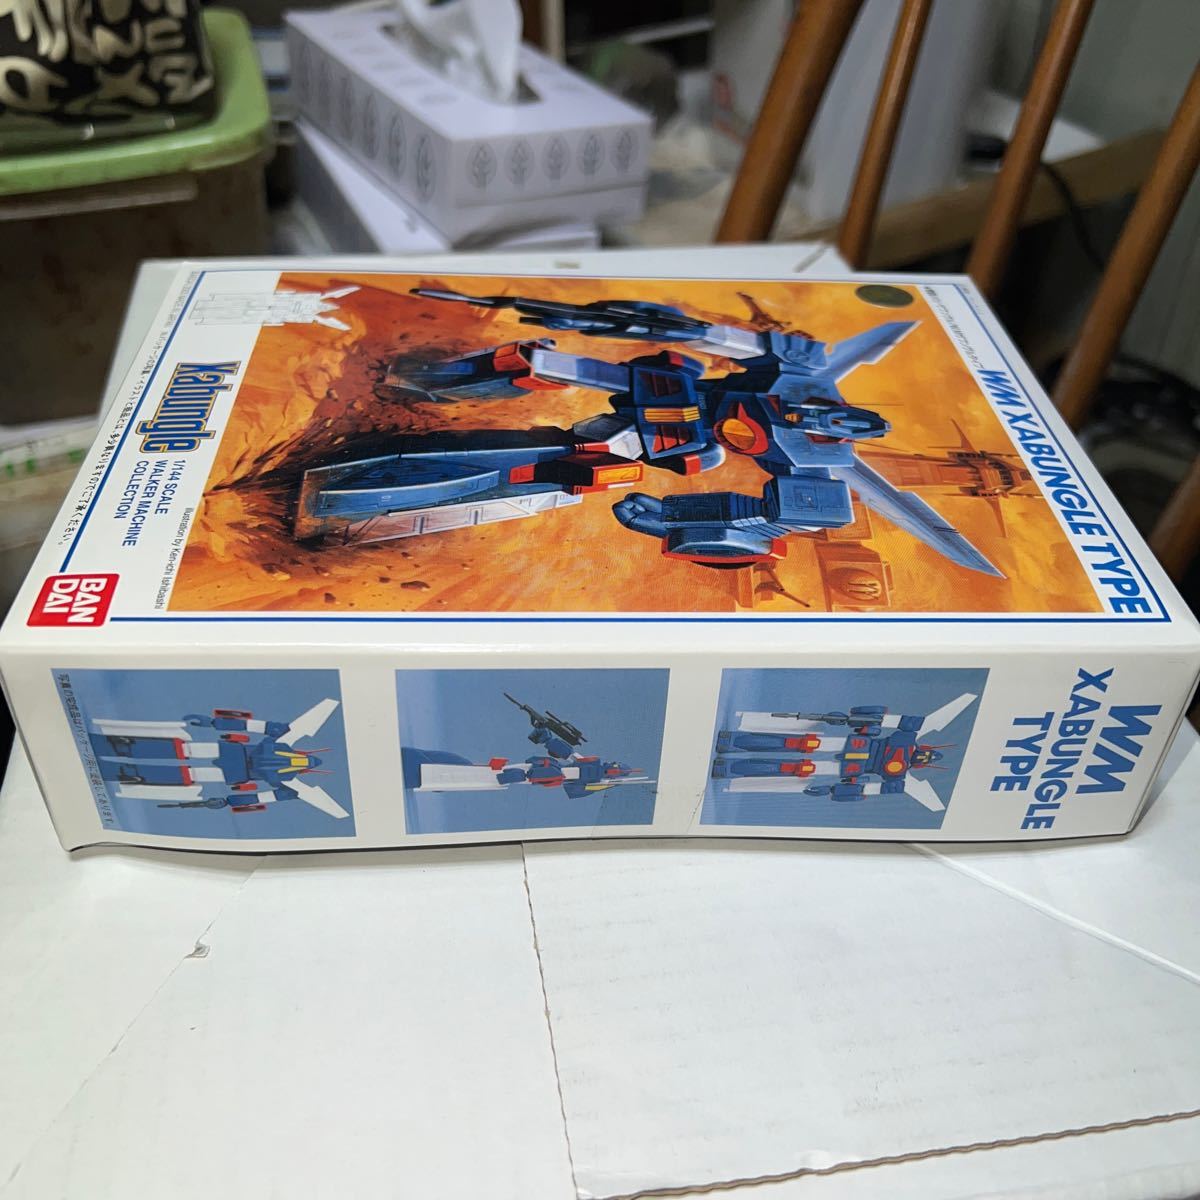  Bandai Blue Gale Xabungle 1/144 The bngru type not yet constructed unopened goods tape cease equipped 